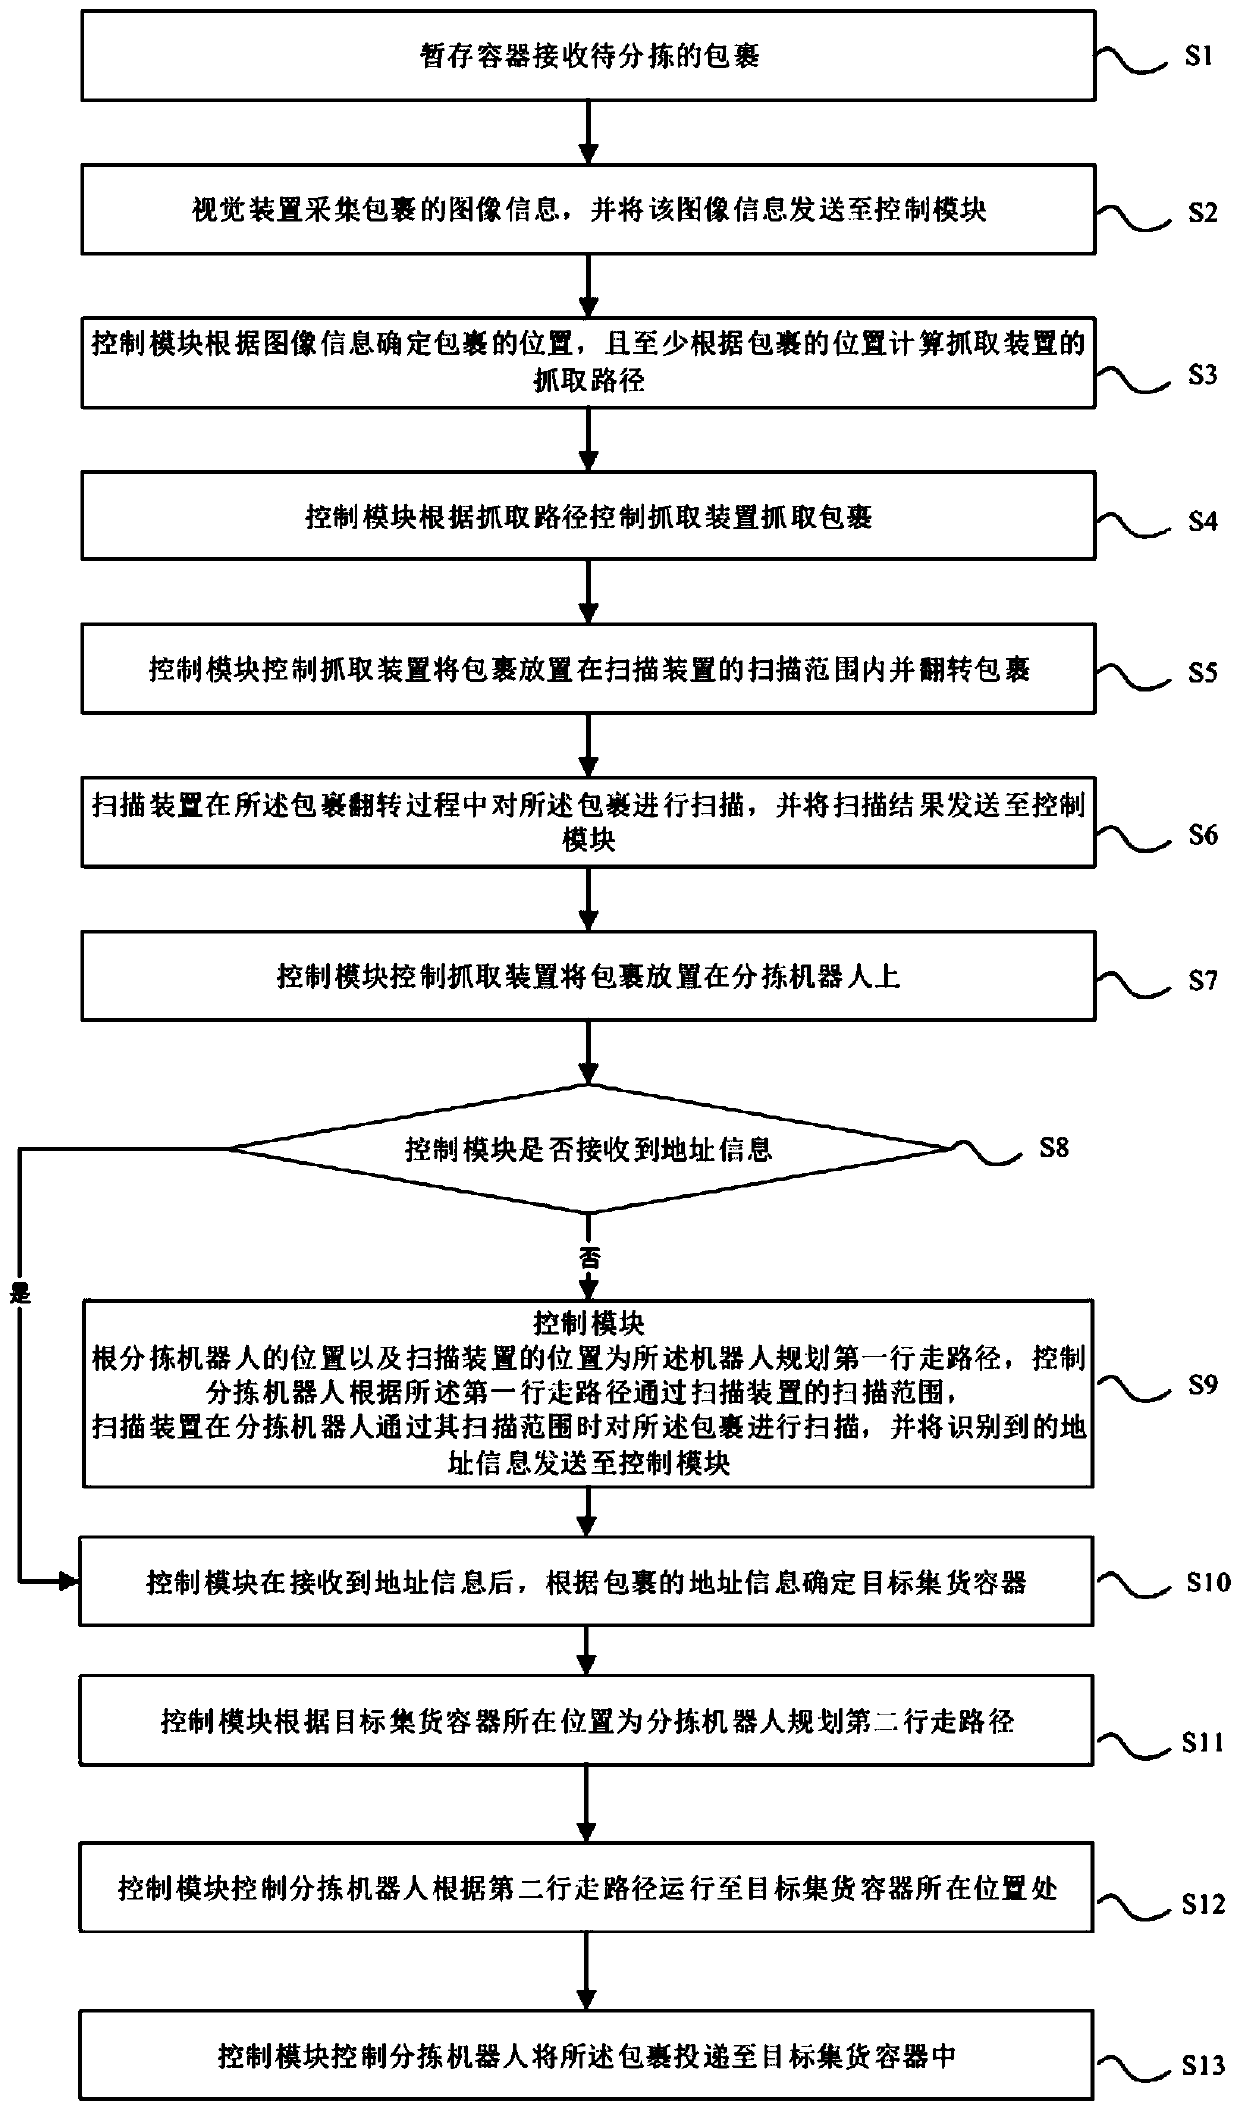 Package address identification system, package address identification method, package sorting system and package sorting method